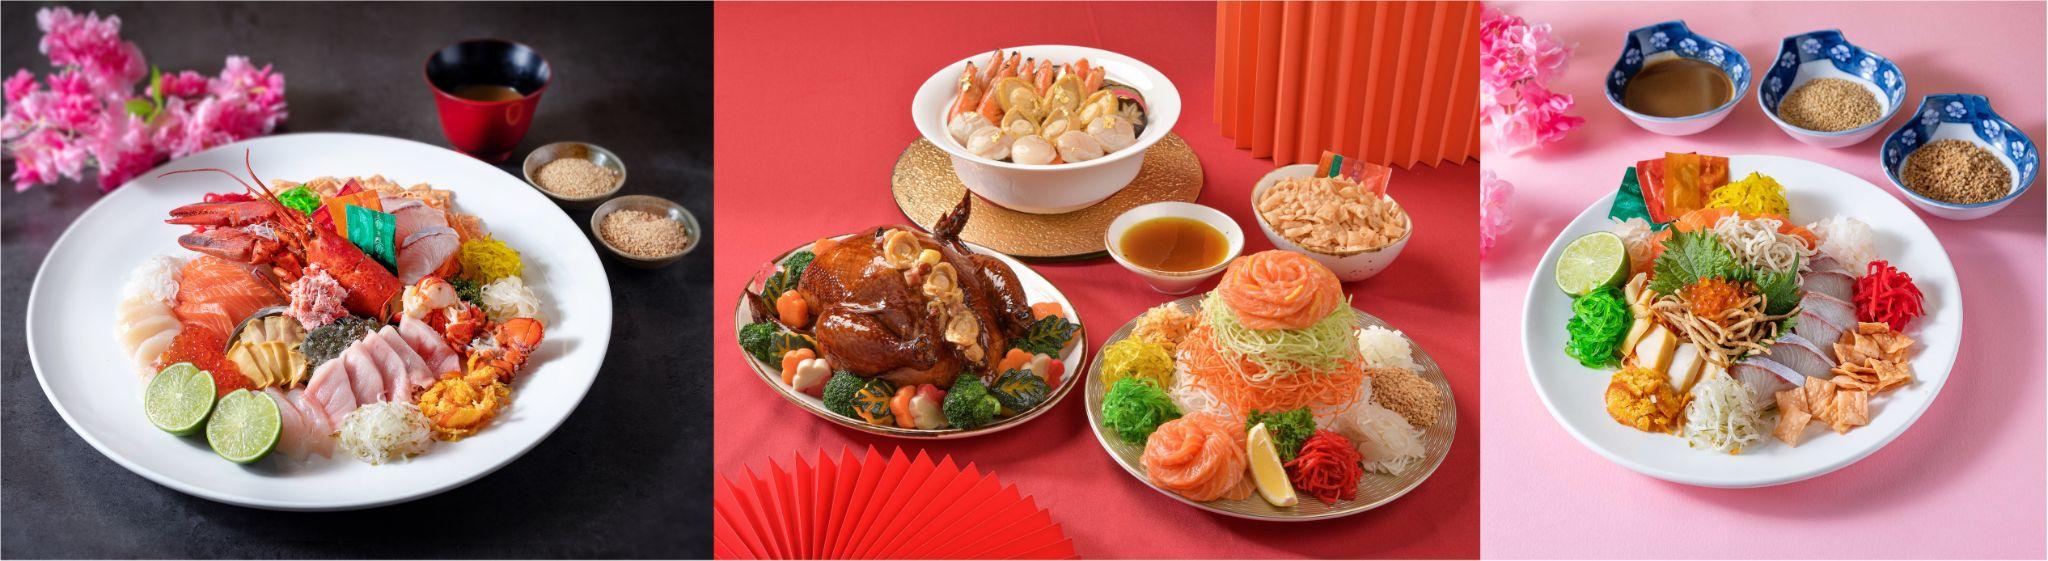 Lobang: MORE THAN 50 CNY 2023 F&B Deals - Your one stop guide to Yusheng, Pen Cai, Set Menus and more this Lunar New Year! - 79